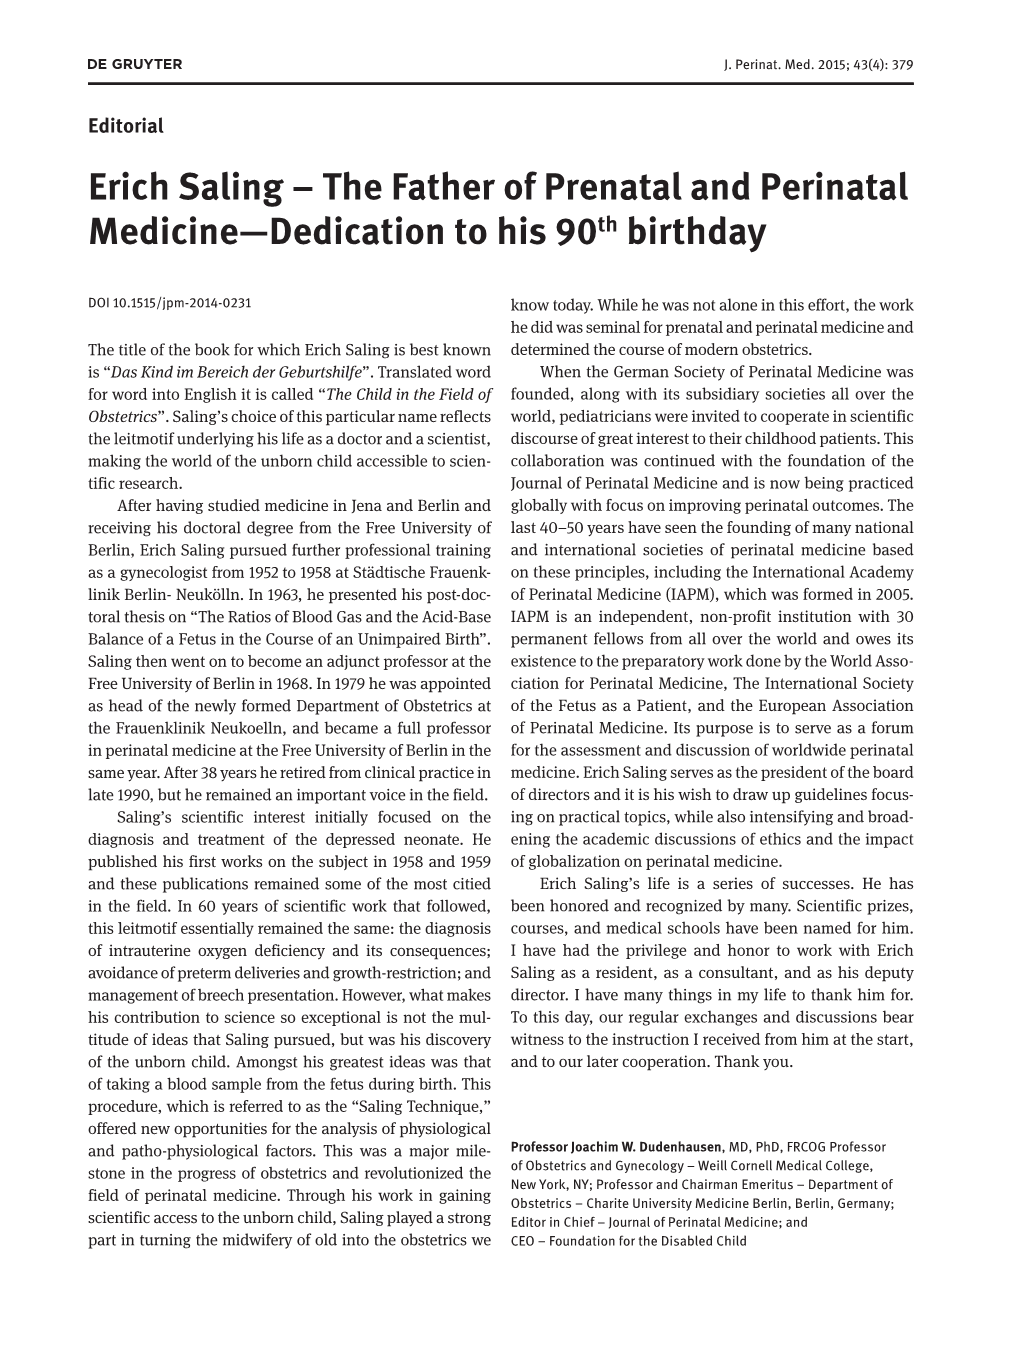 Erich Saling – the Father of Prenatal and Perinatal Medicine—Dedication to His 90Th Birthday